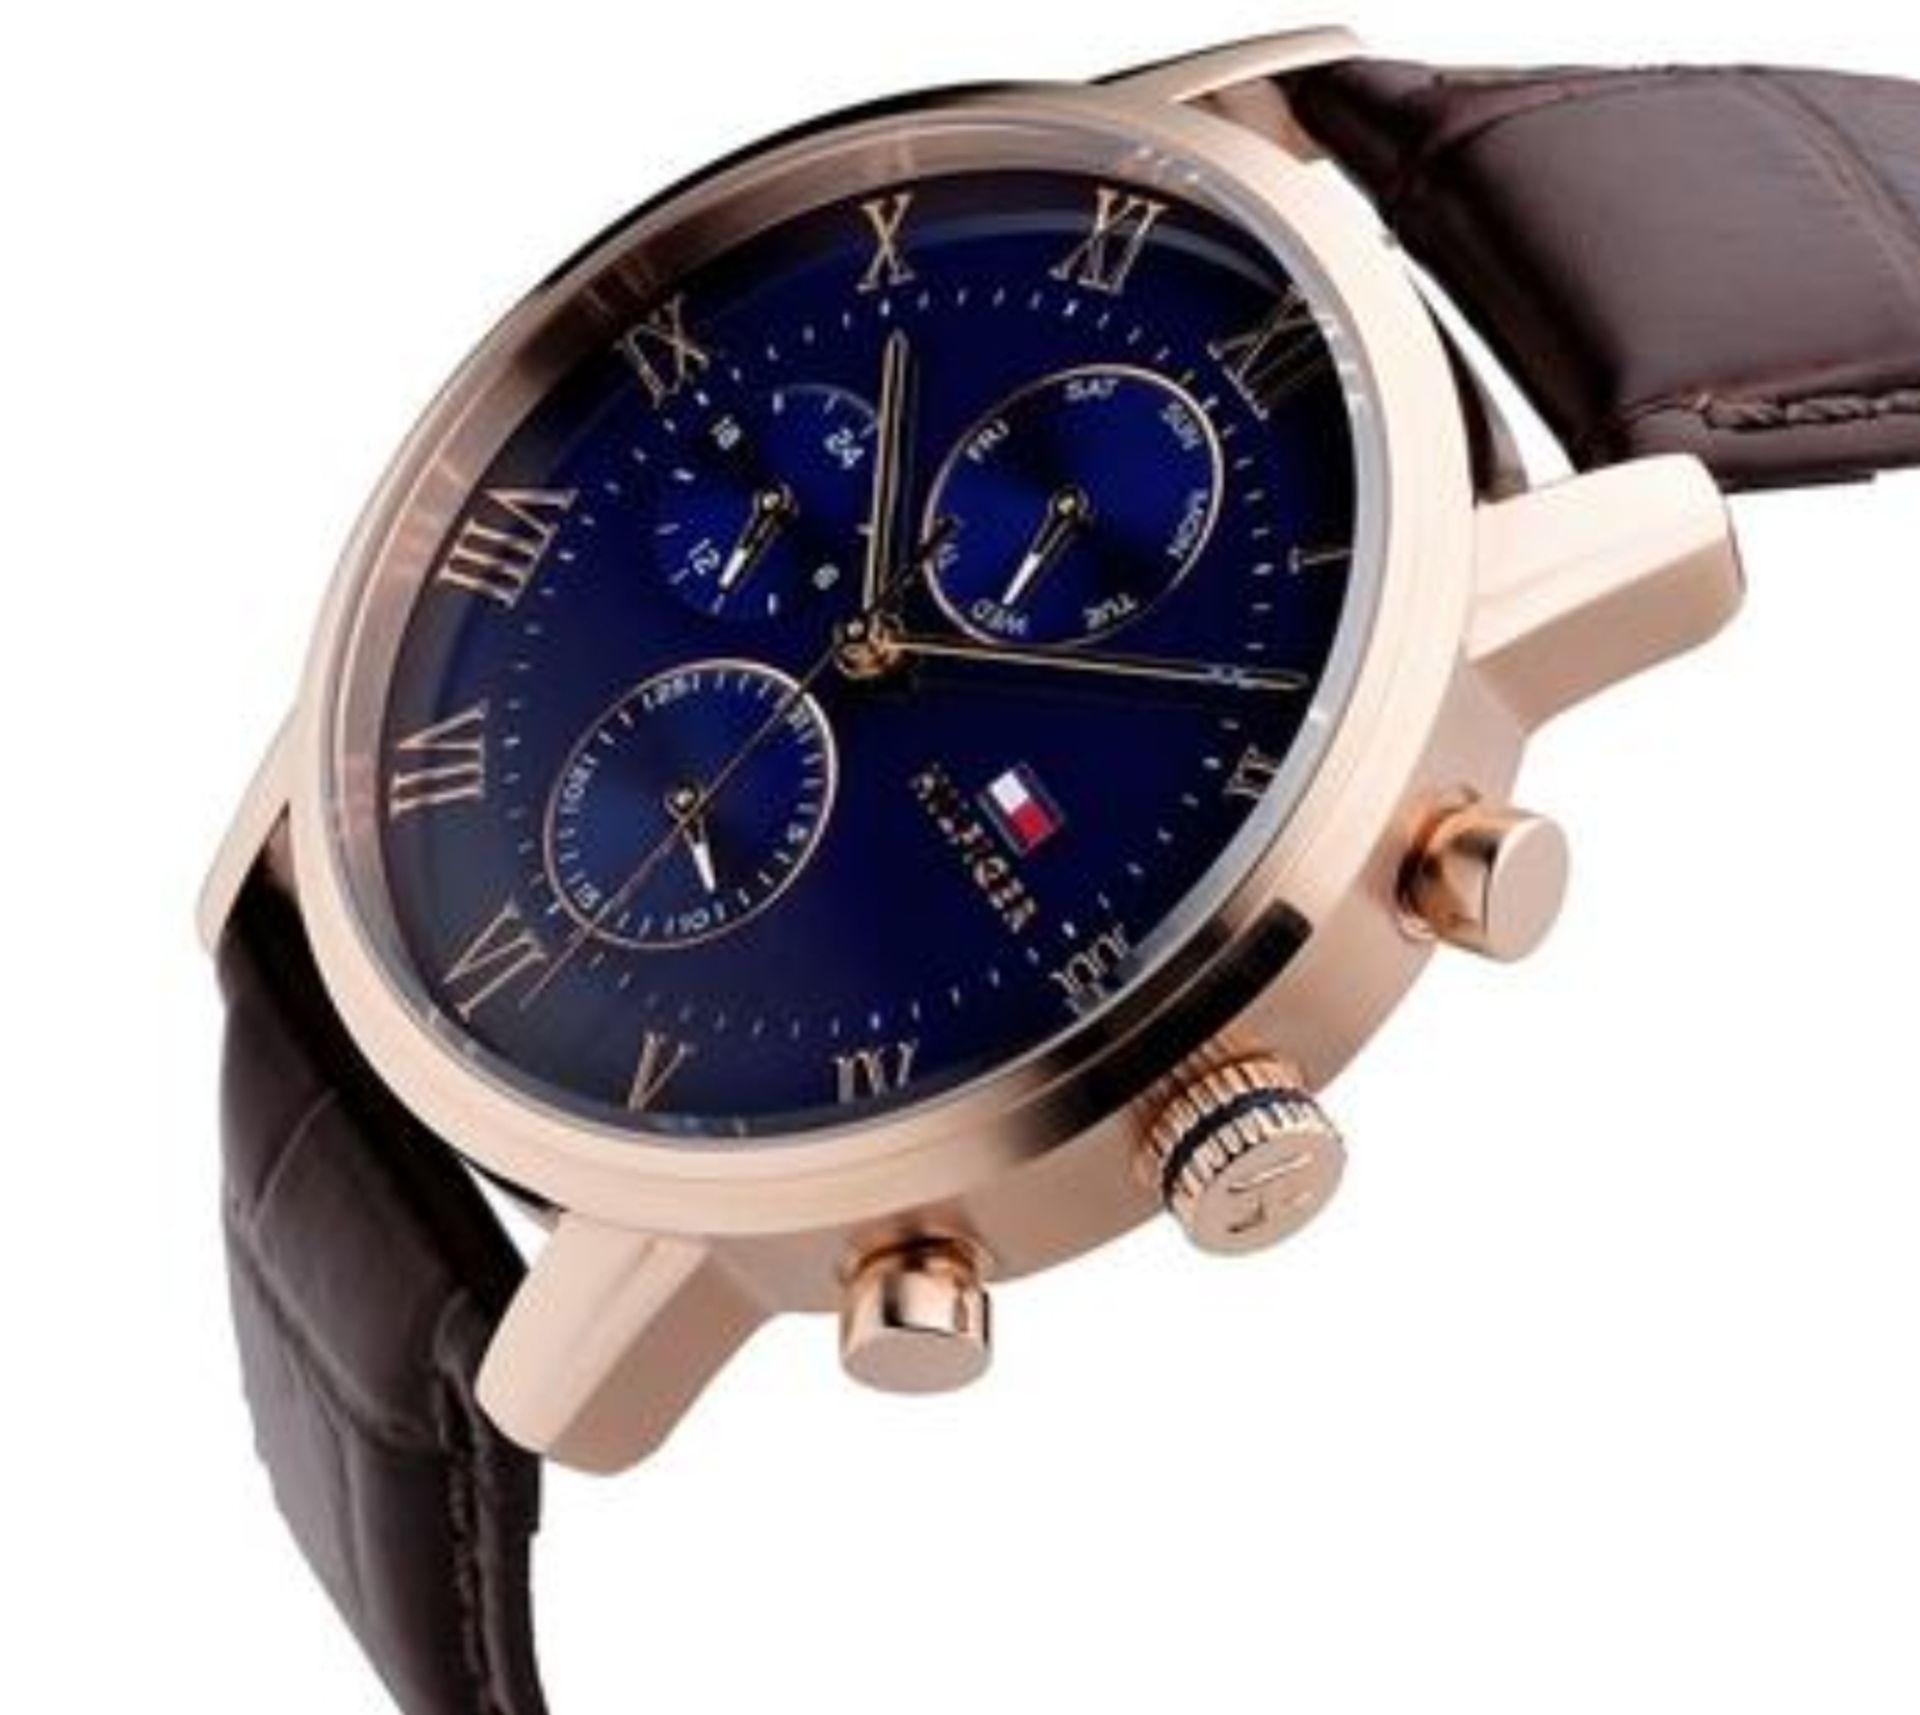 Tommy Hilfiger 1791399 Kane Rose Gold Tone Chronograph Men's Watch - Image 4 of 6